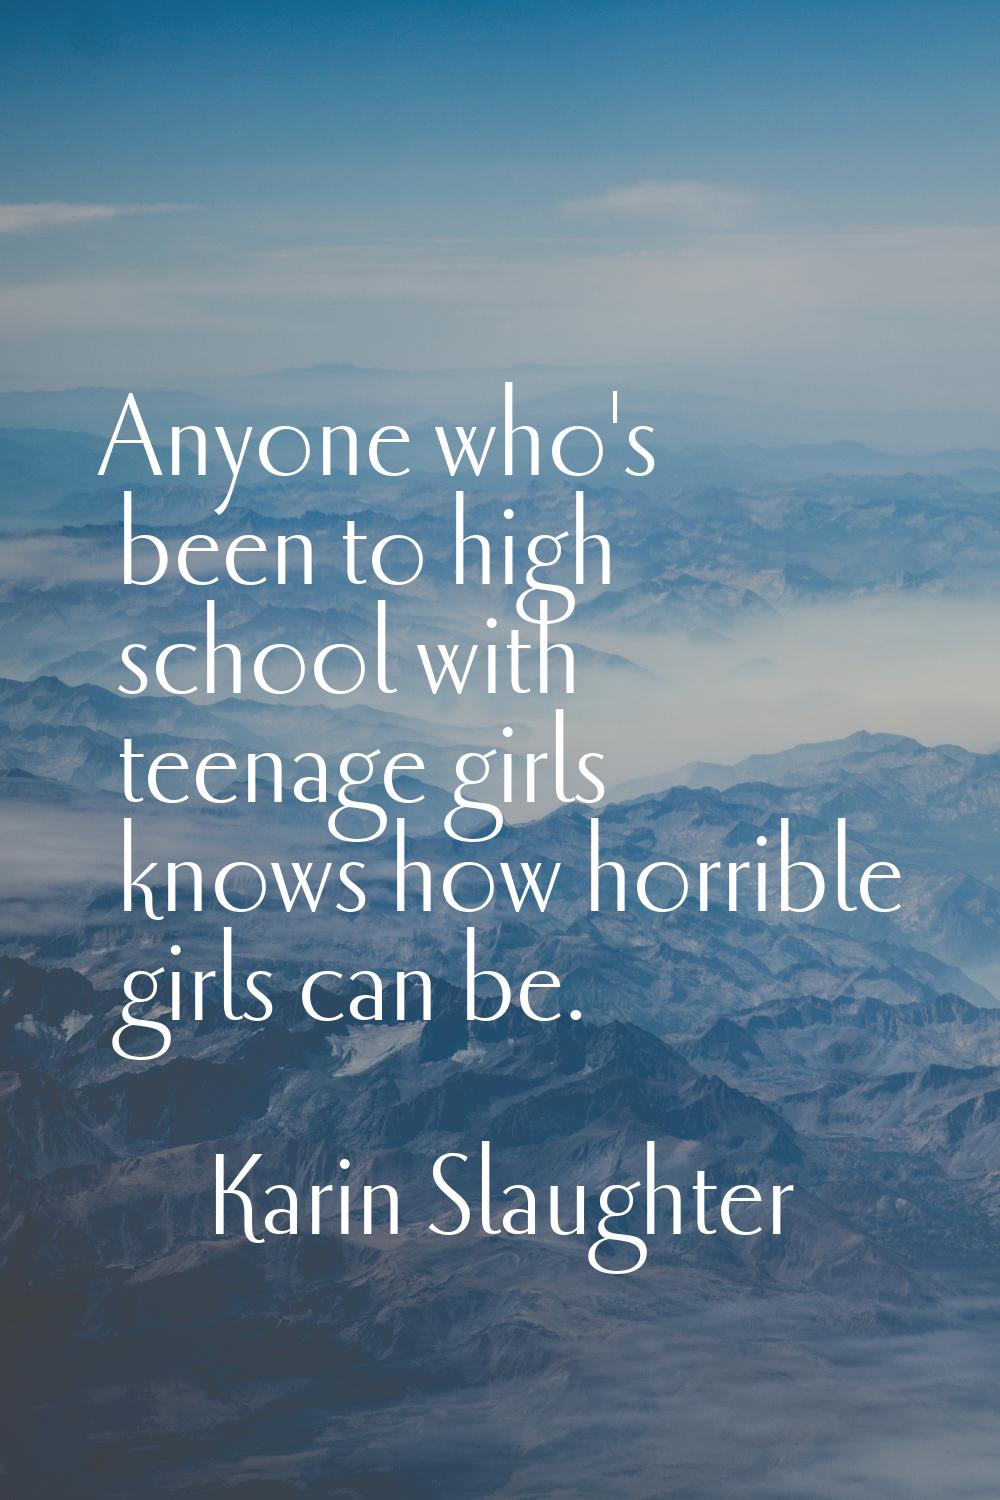 Anyone who's been to high school with teenage girls knows how horrible girls can be.